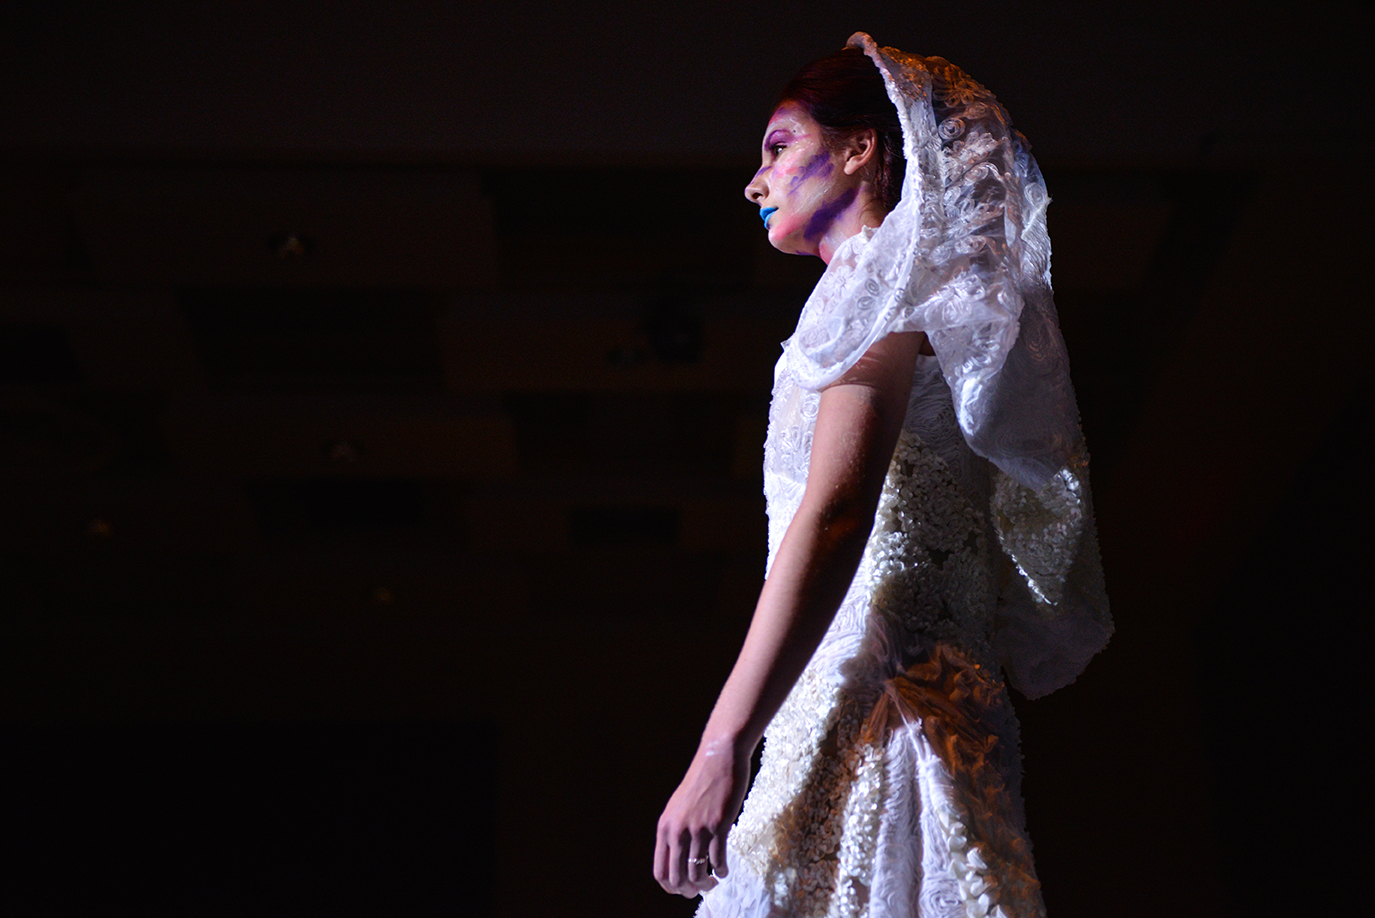 Emily Bouchoc, a junior studying cinema from Collierville, Tennessee, models on the runway during the fashion design and merchandising student showcase and fashion show Thursday, April 27, 2017, in the Student Center ballrooms. The dress was designed by Olivia Martinez, a junior in the fashion design and merchandising program from Round Lake, who designed six pieces in the showcase. (Branda Mitchell | @branda_mitchell)